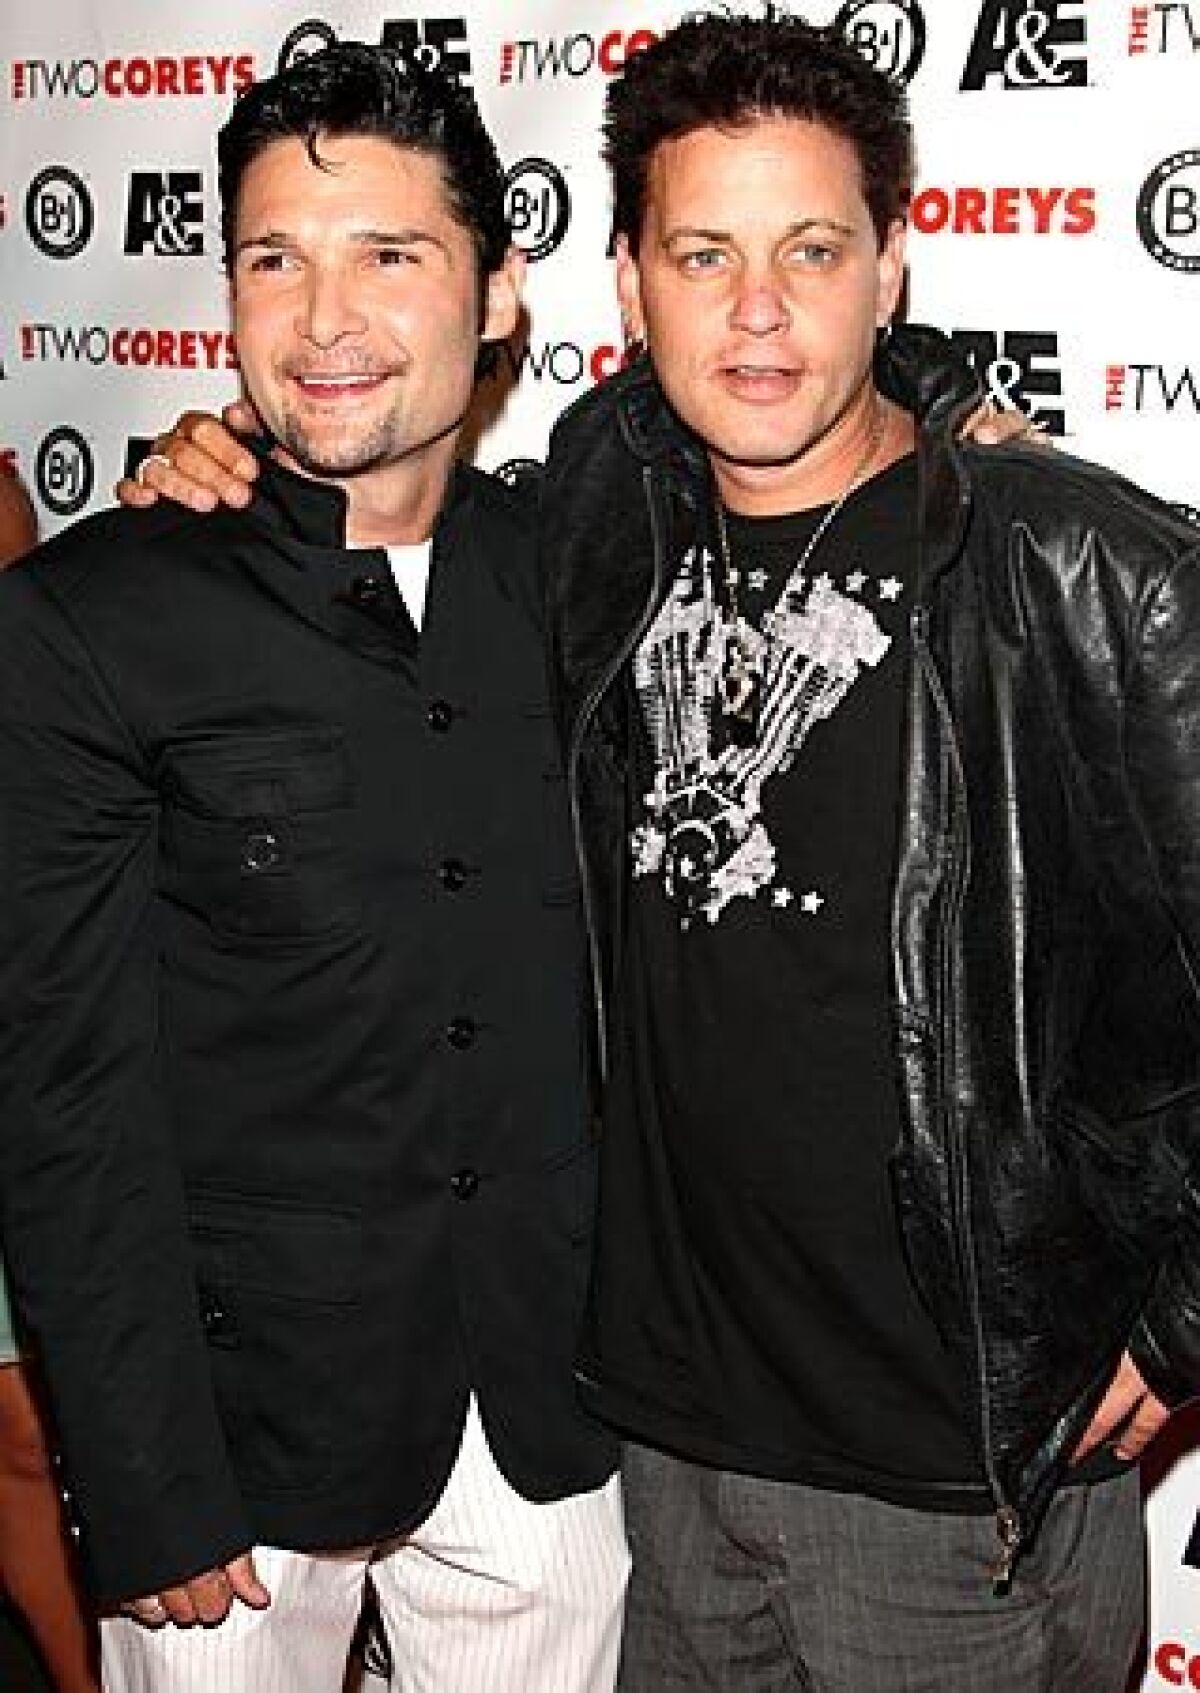 Corey Feldman, left, and Corey Haim attend the premiere of "The Two Coreys," an A&E reality show, in 2007.